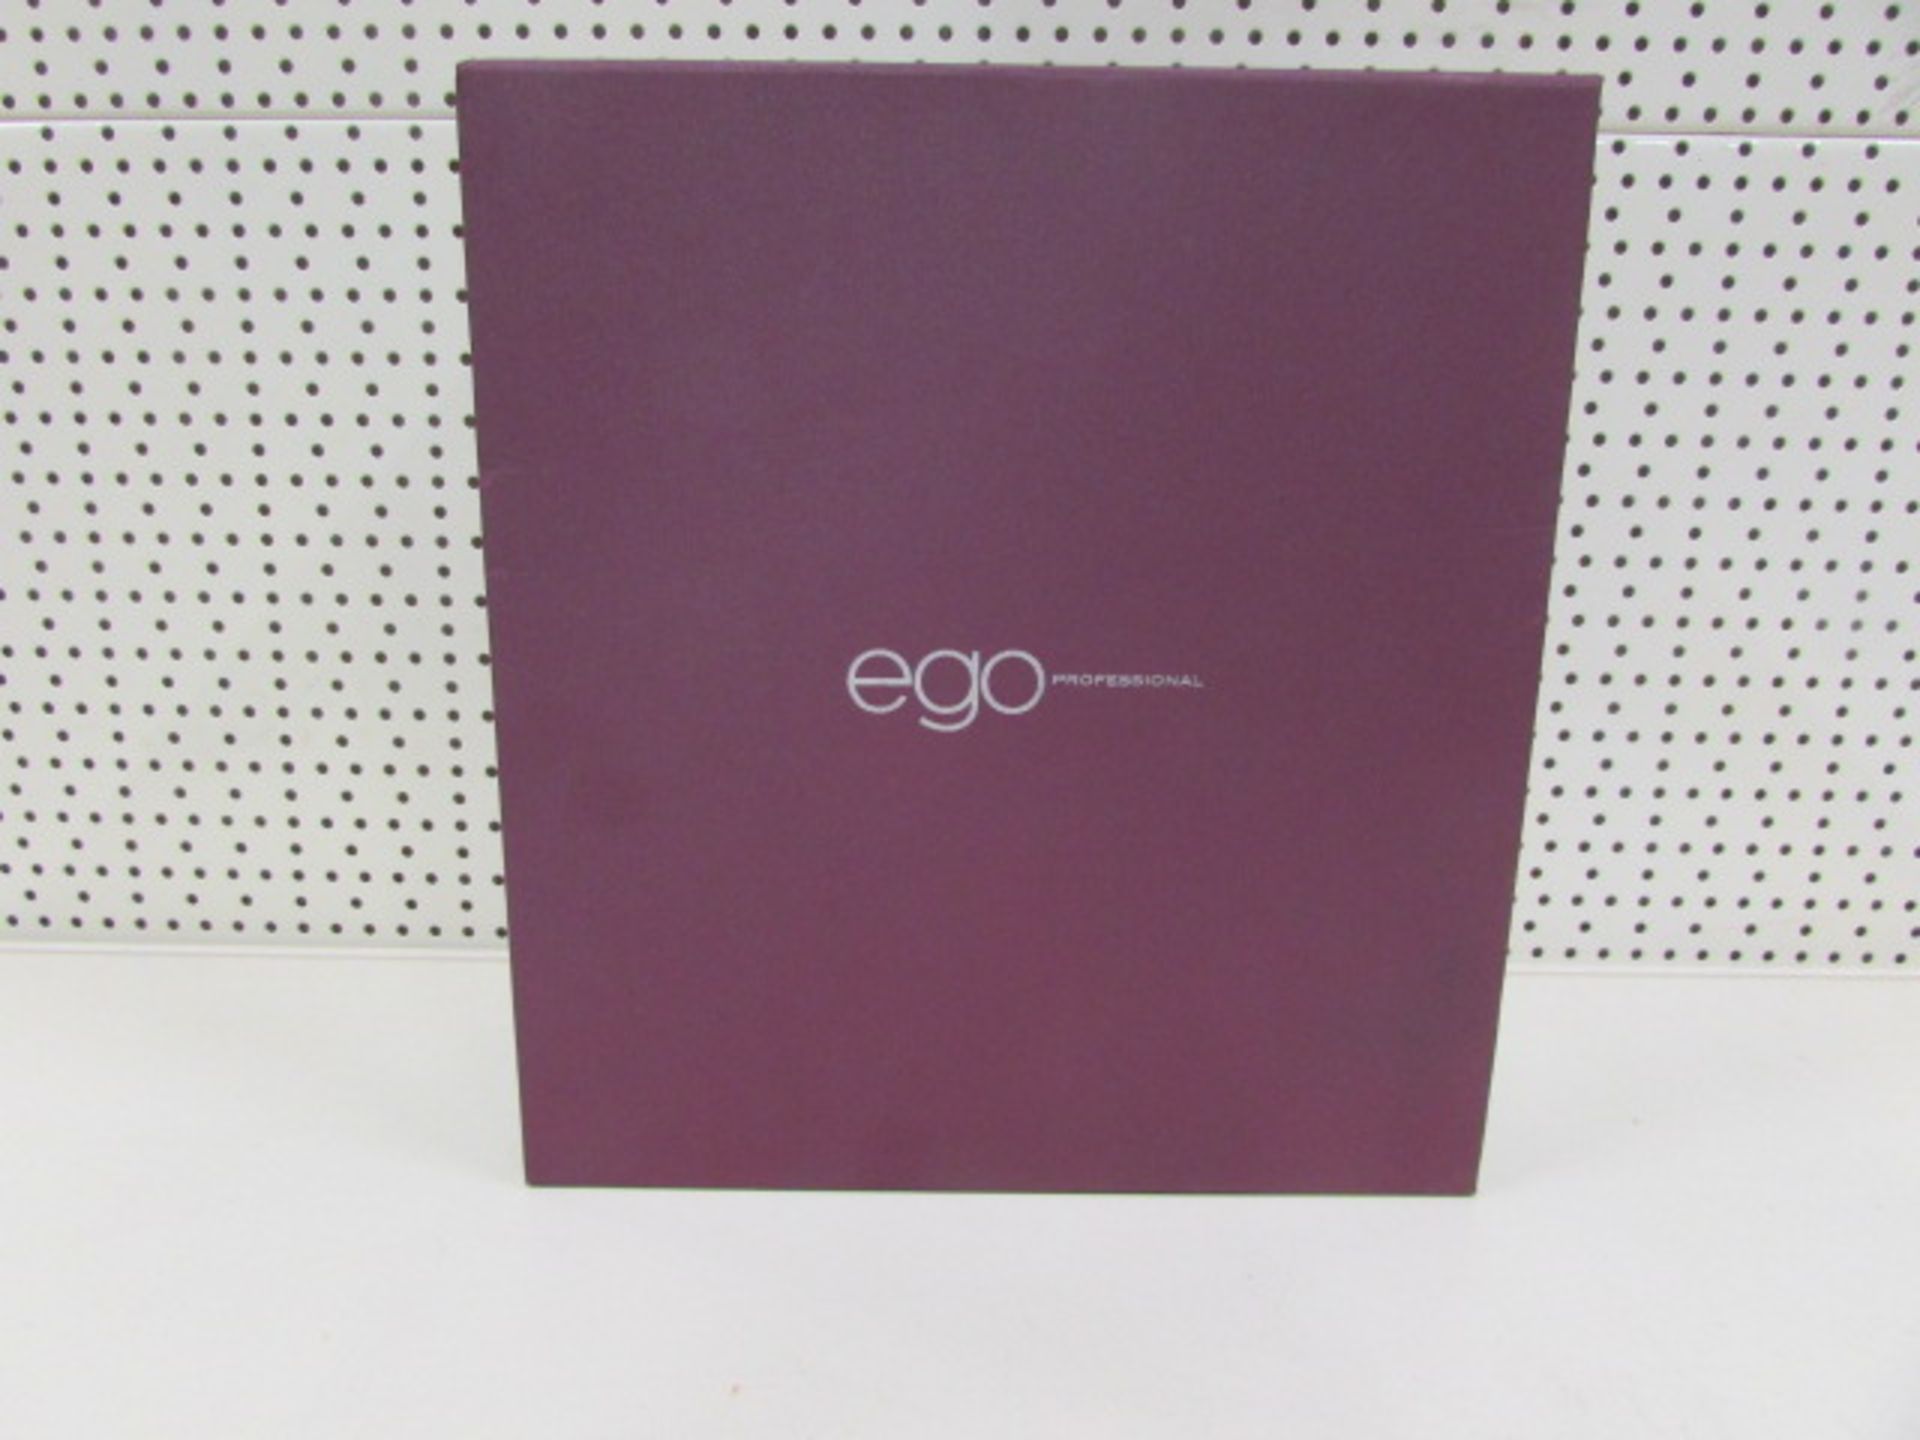 3 X Ego Professional Ego Evolve Hairdryer + Difusser [Brand New] - Image 6 of 6